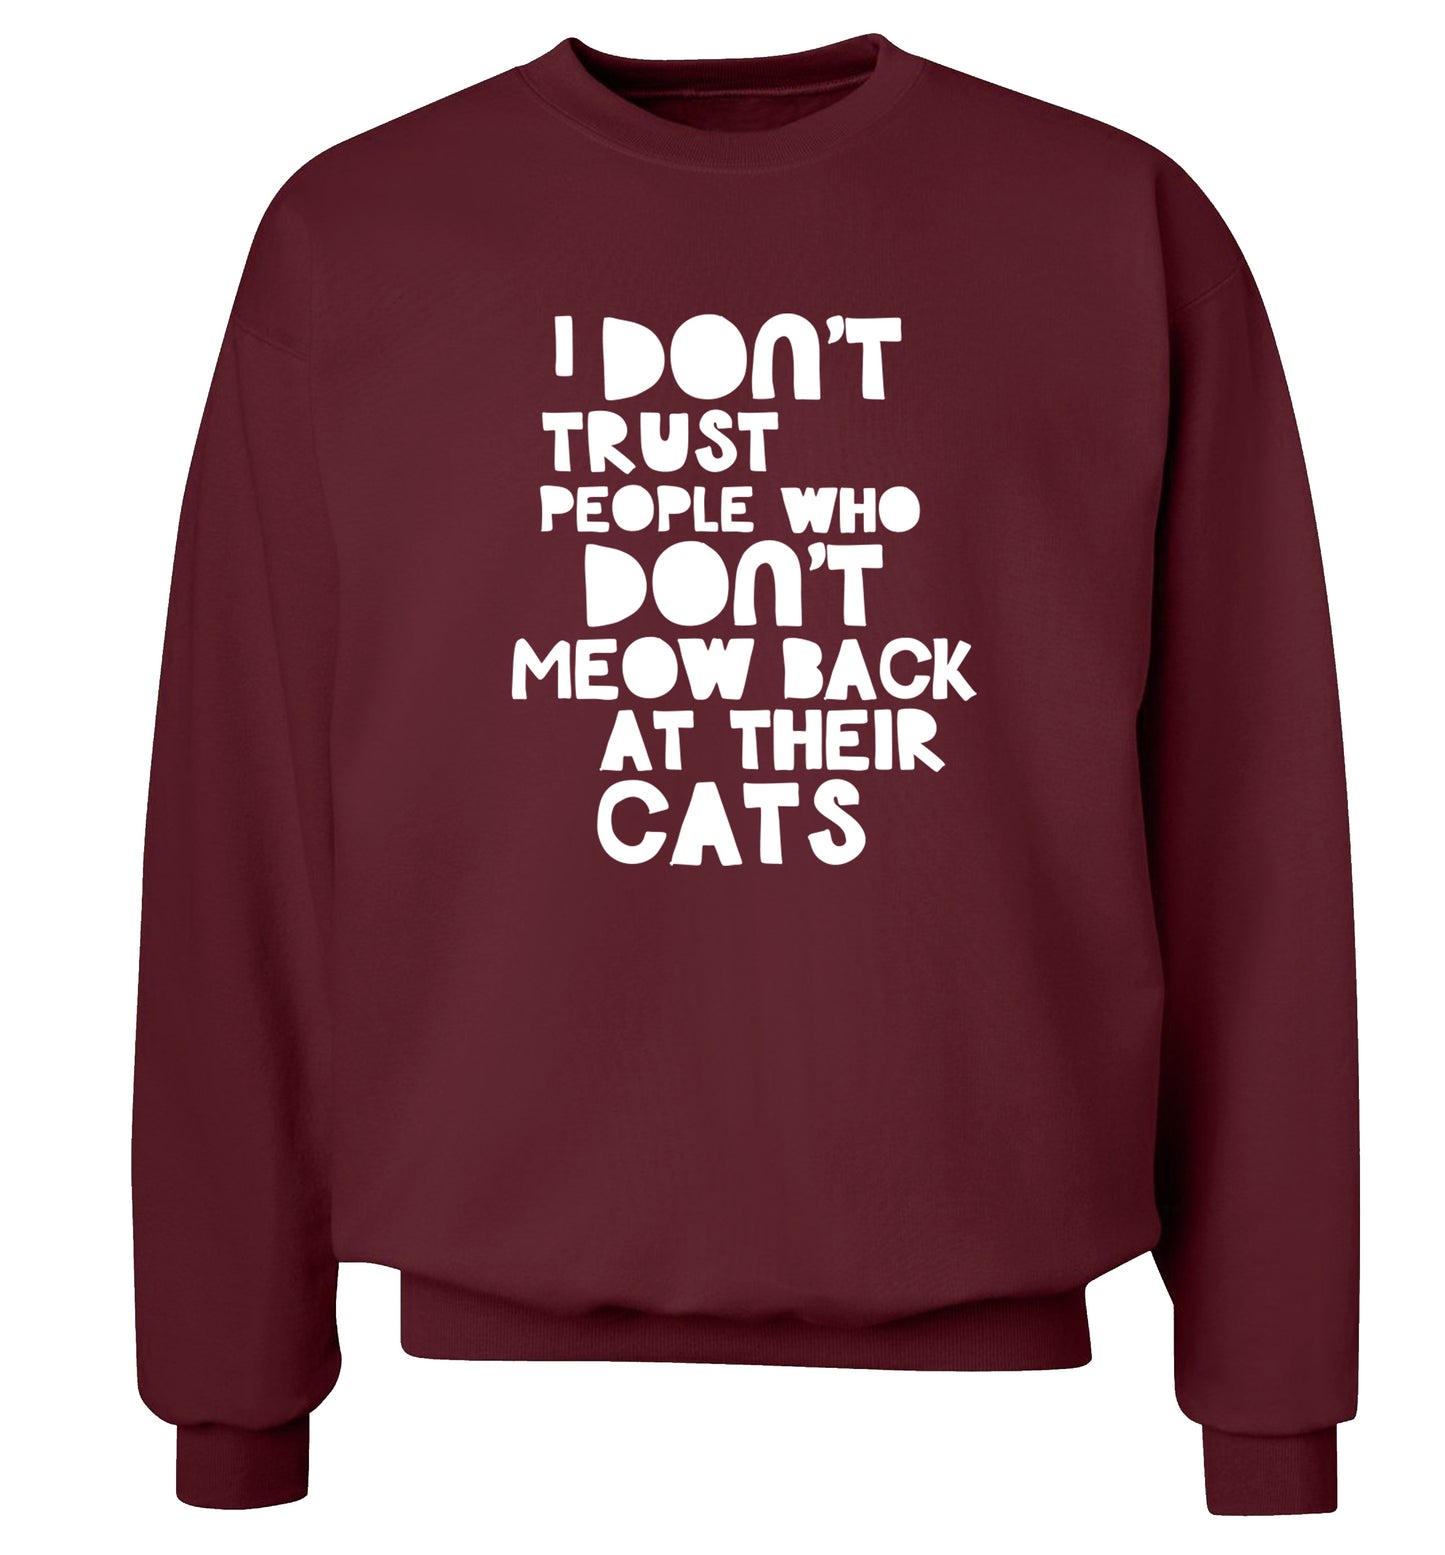 I don't trust people who don't meow back at their cats Adult's unisex maroon Sweater 2XL